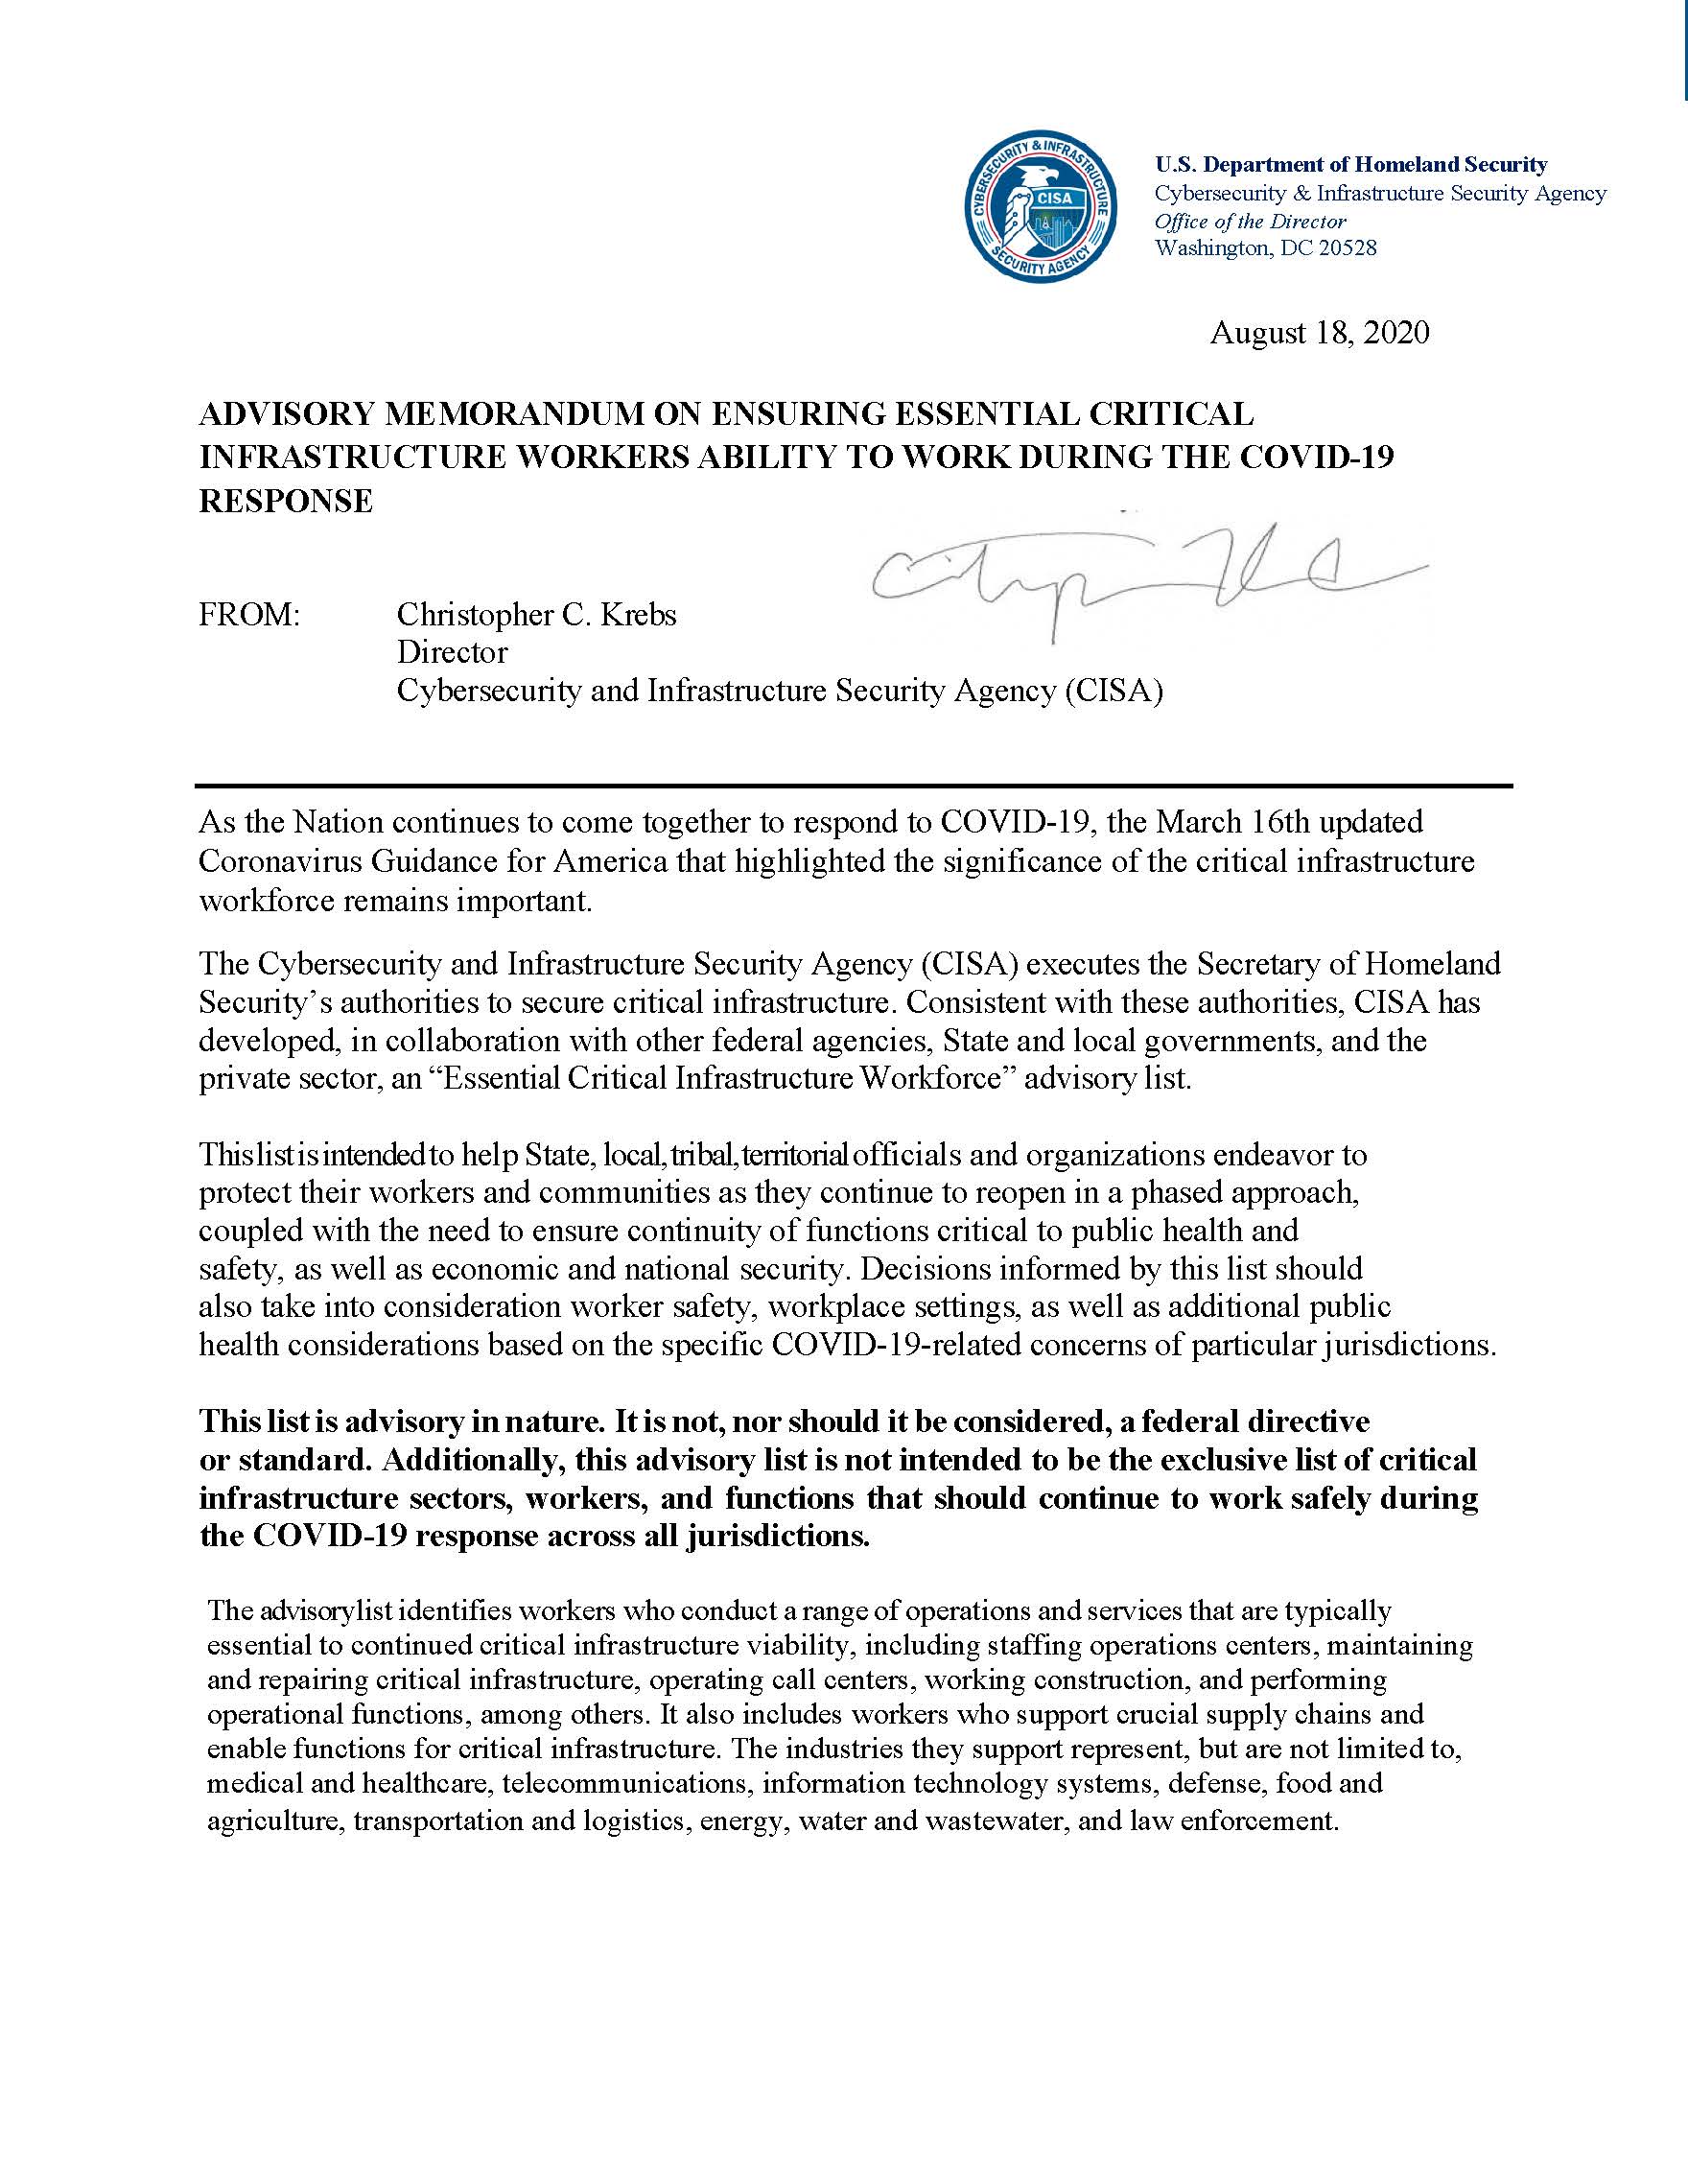 August 18, 2020
<br />
<br />ADVISORY MEMORANDUM ON ENSURING ESSENTIAL CRITICAL INFRASTRUCTURE WORKERS ABILITY TO WORK DURING THE COVID-19 RESPONSE
<br />
<br />FROM:	Christopher C. Krebs Director
<br />Cybersecurity and Infrastructure Security Agency (CISA)
<br />